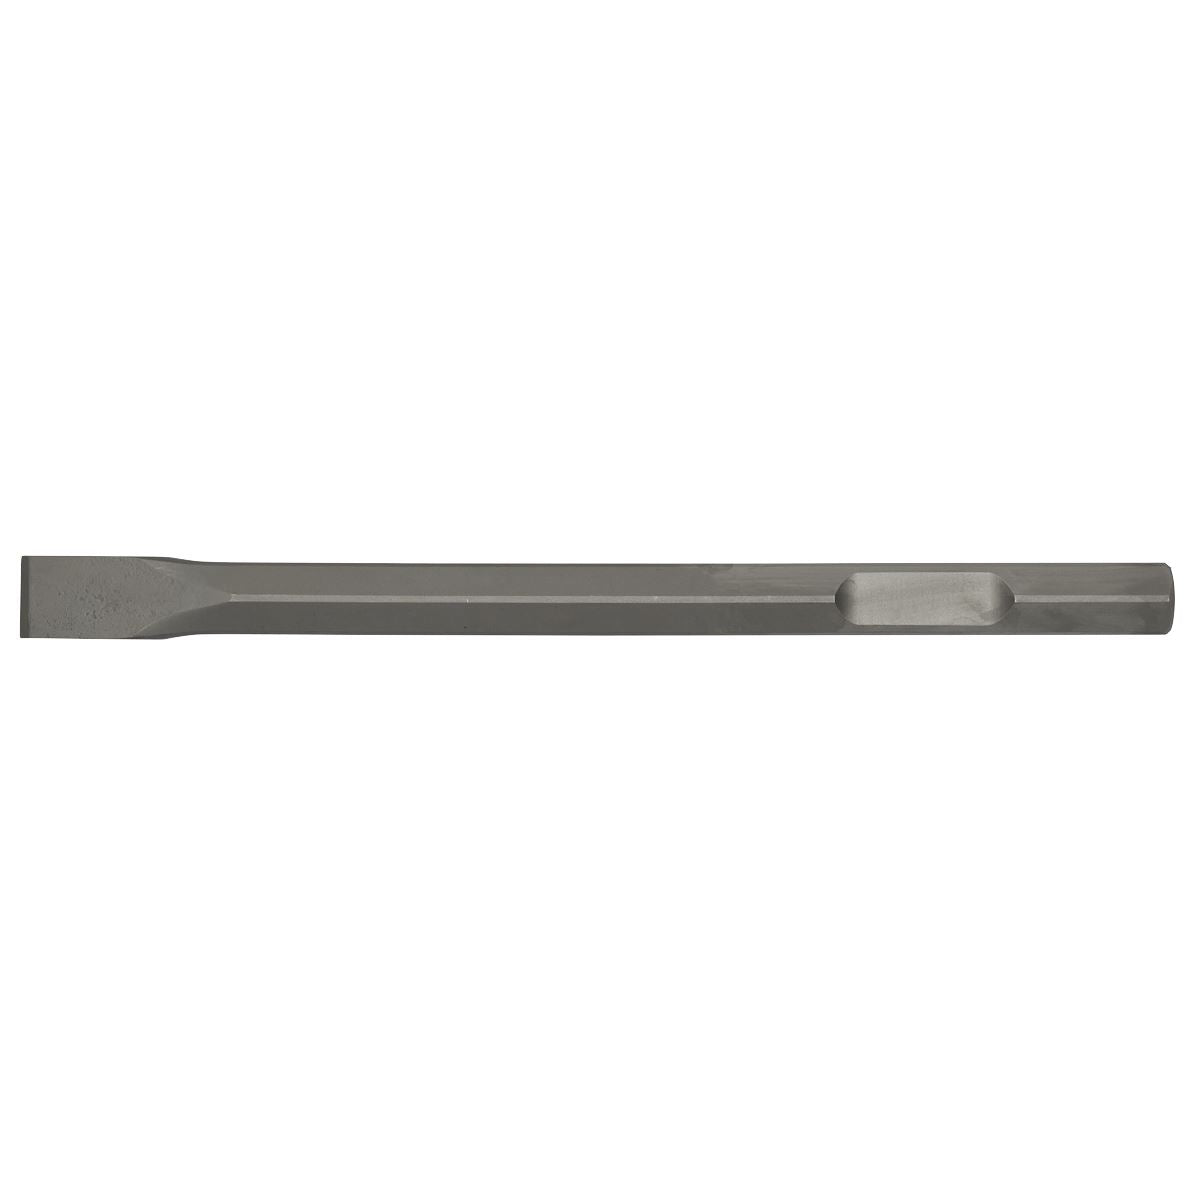 Worksafe by Sealey Chisel 30 x 450mm - Bosch 11304